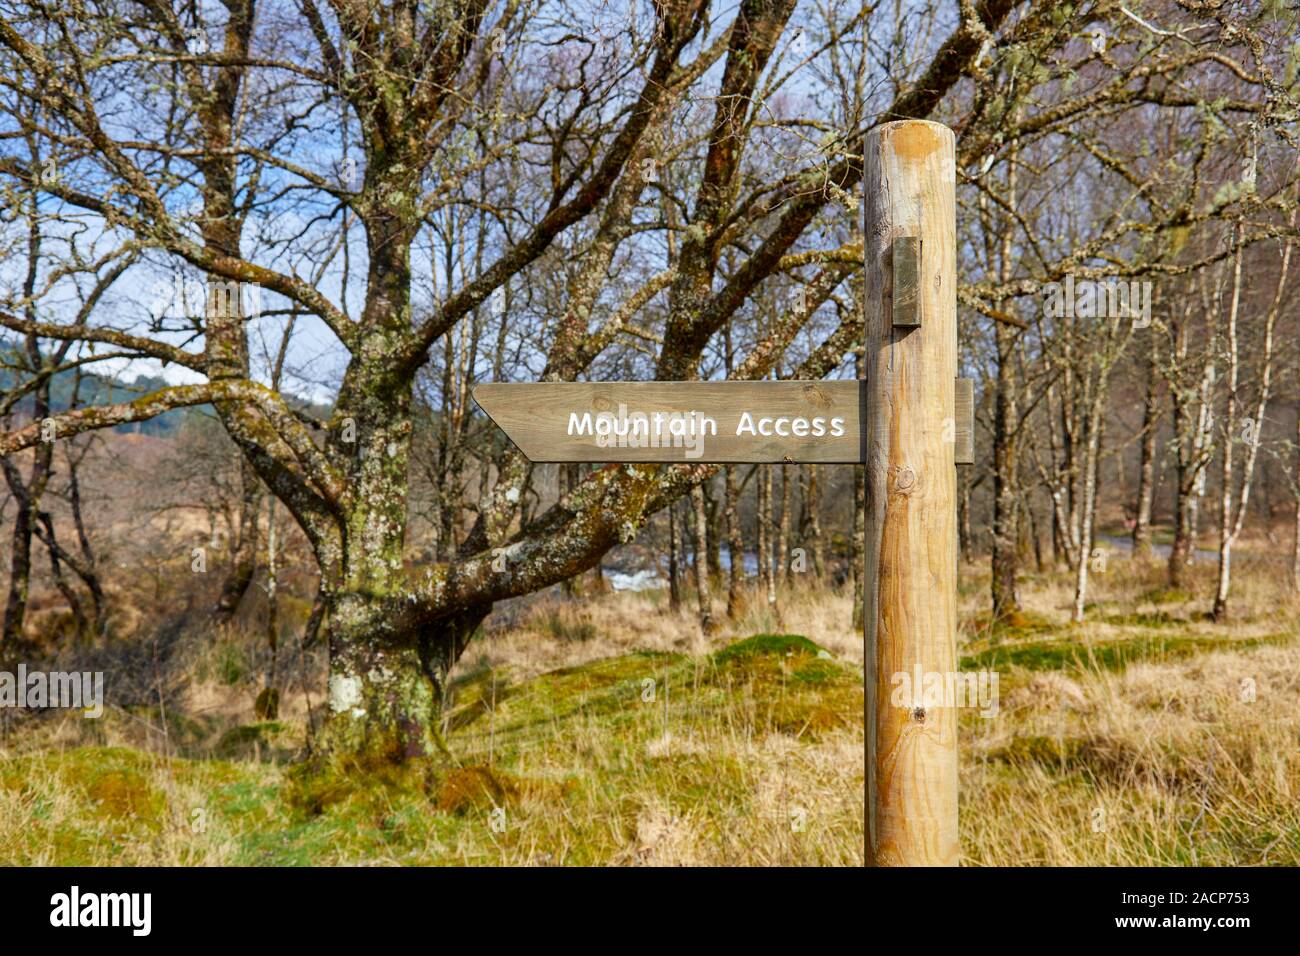 Mountain Access wooden directional sign post in remote area, Glen of Orchy, Scotland Stock Photo